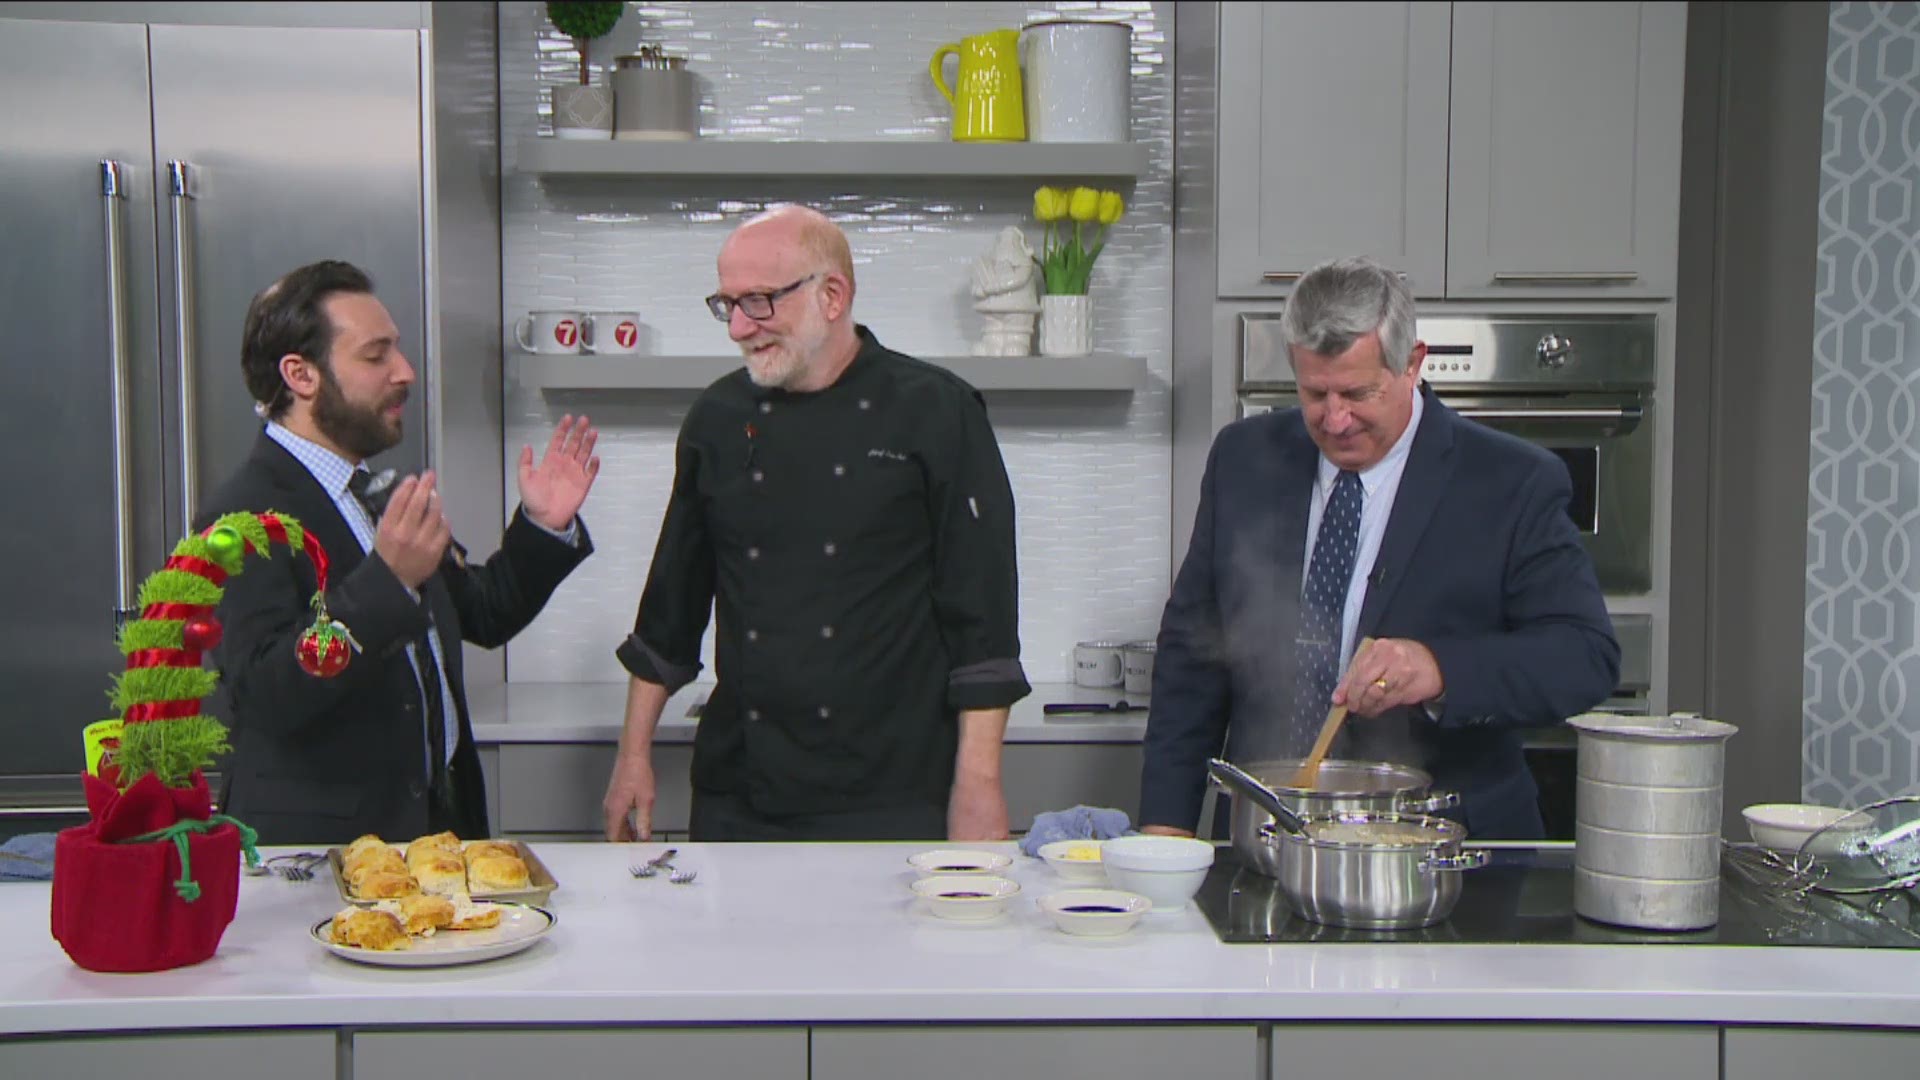 Chef Lou shows how to make this popular breakfast dish.